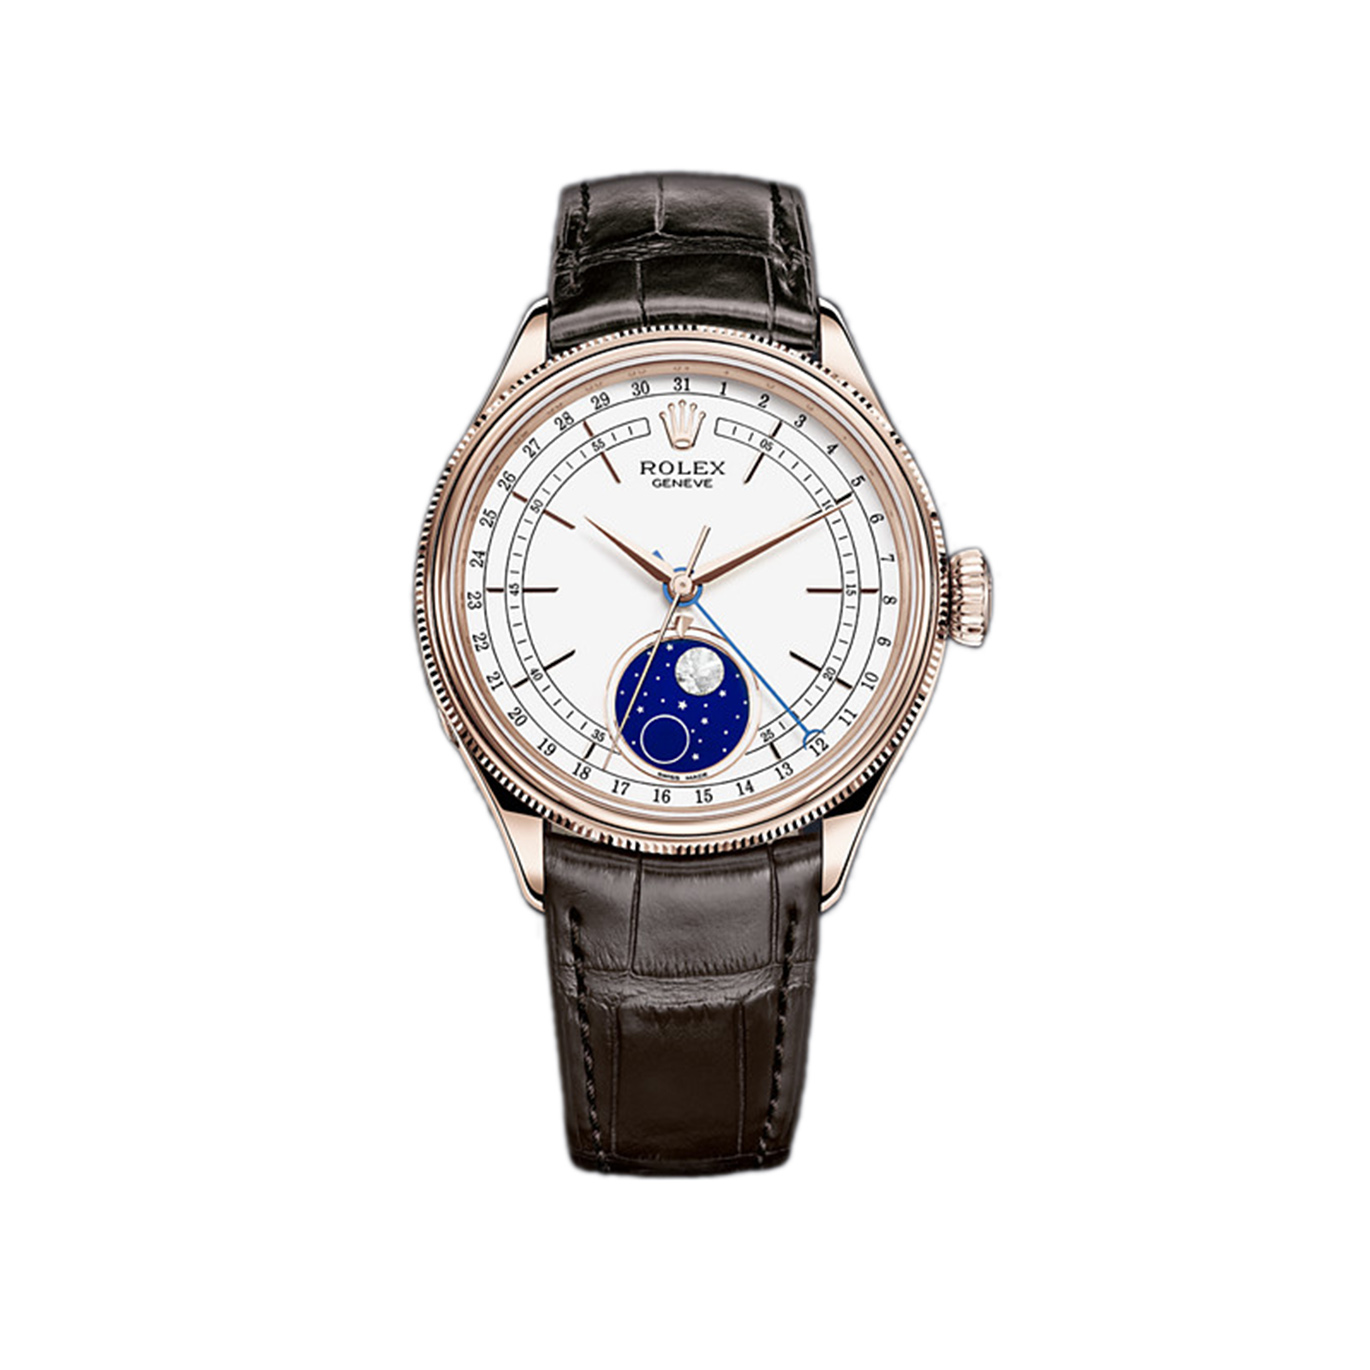 Cellini Moonphase 50535 Rose Gold Watch (White)